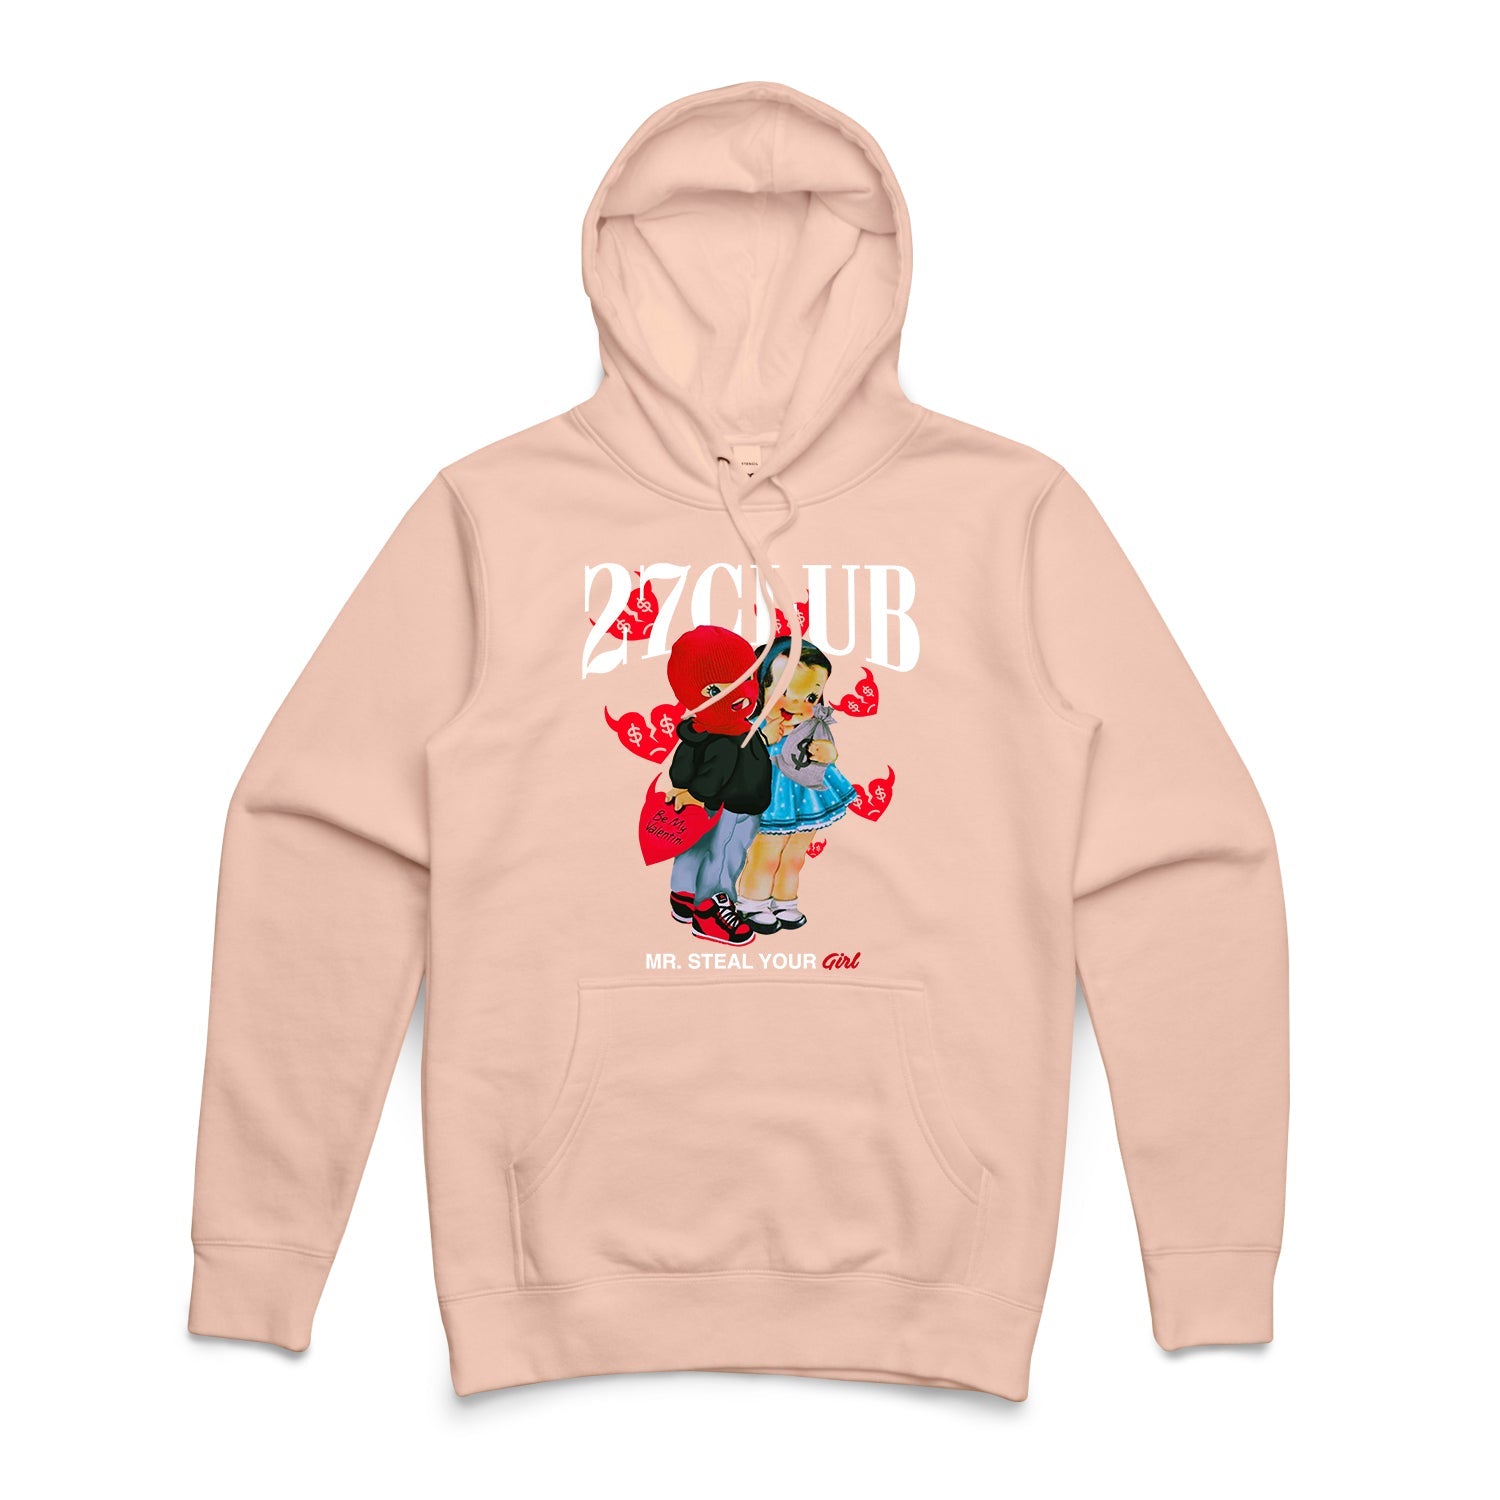 Mr Steal Your Girl - Hoodie